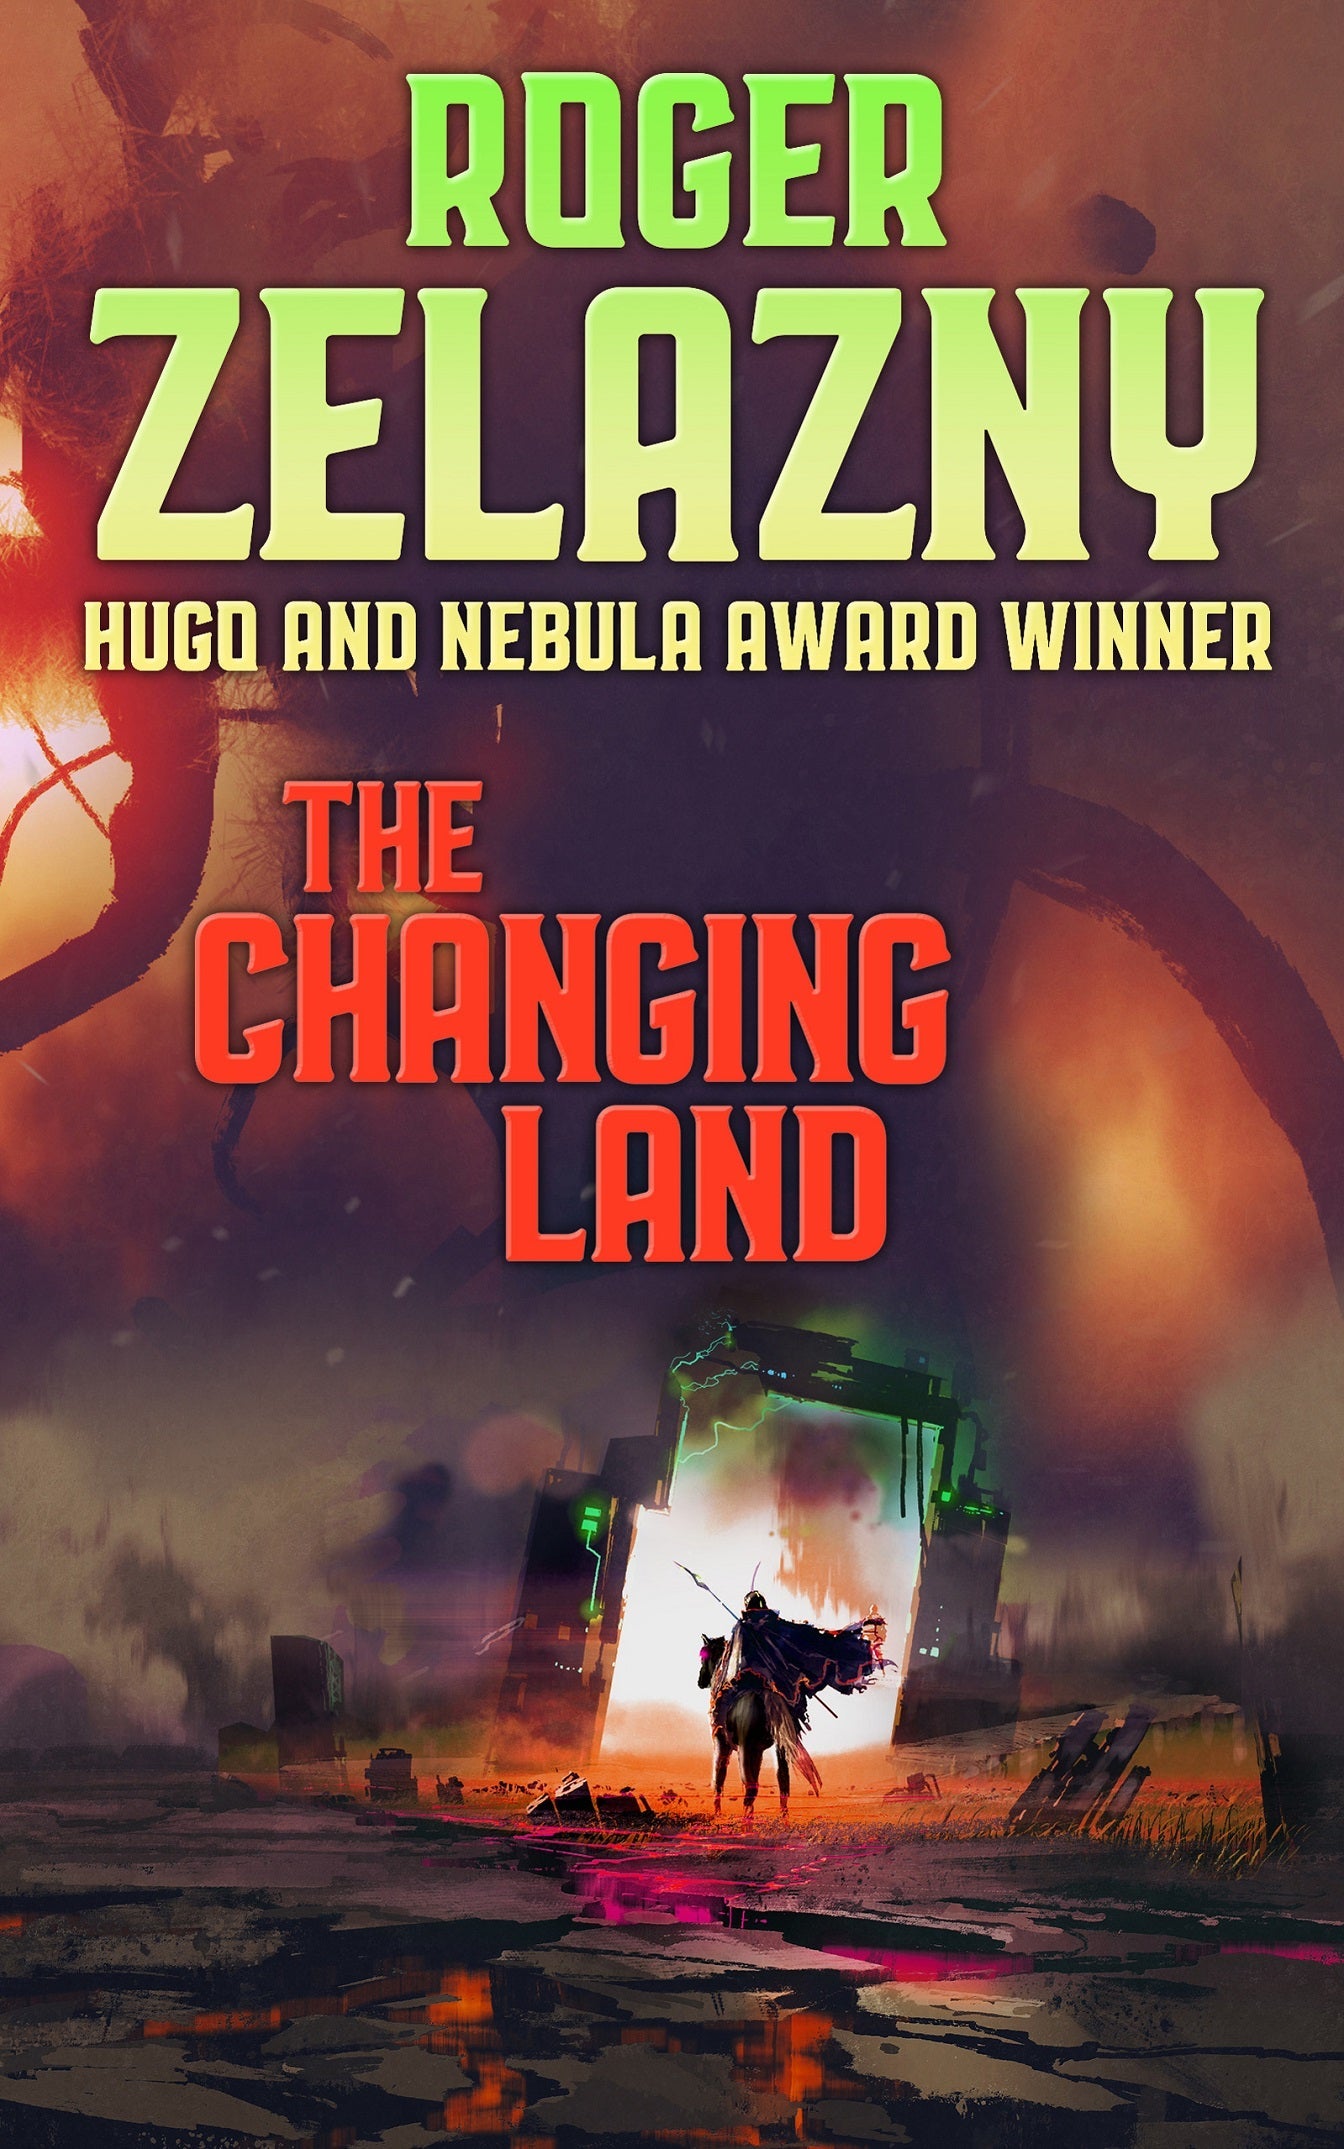 Cover art for The Changing Land.